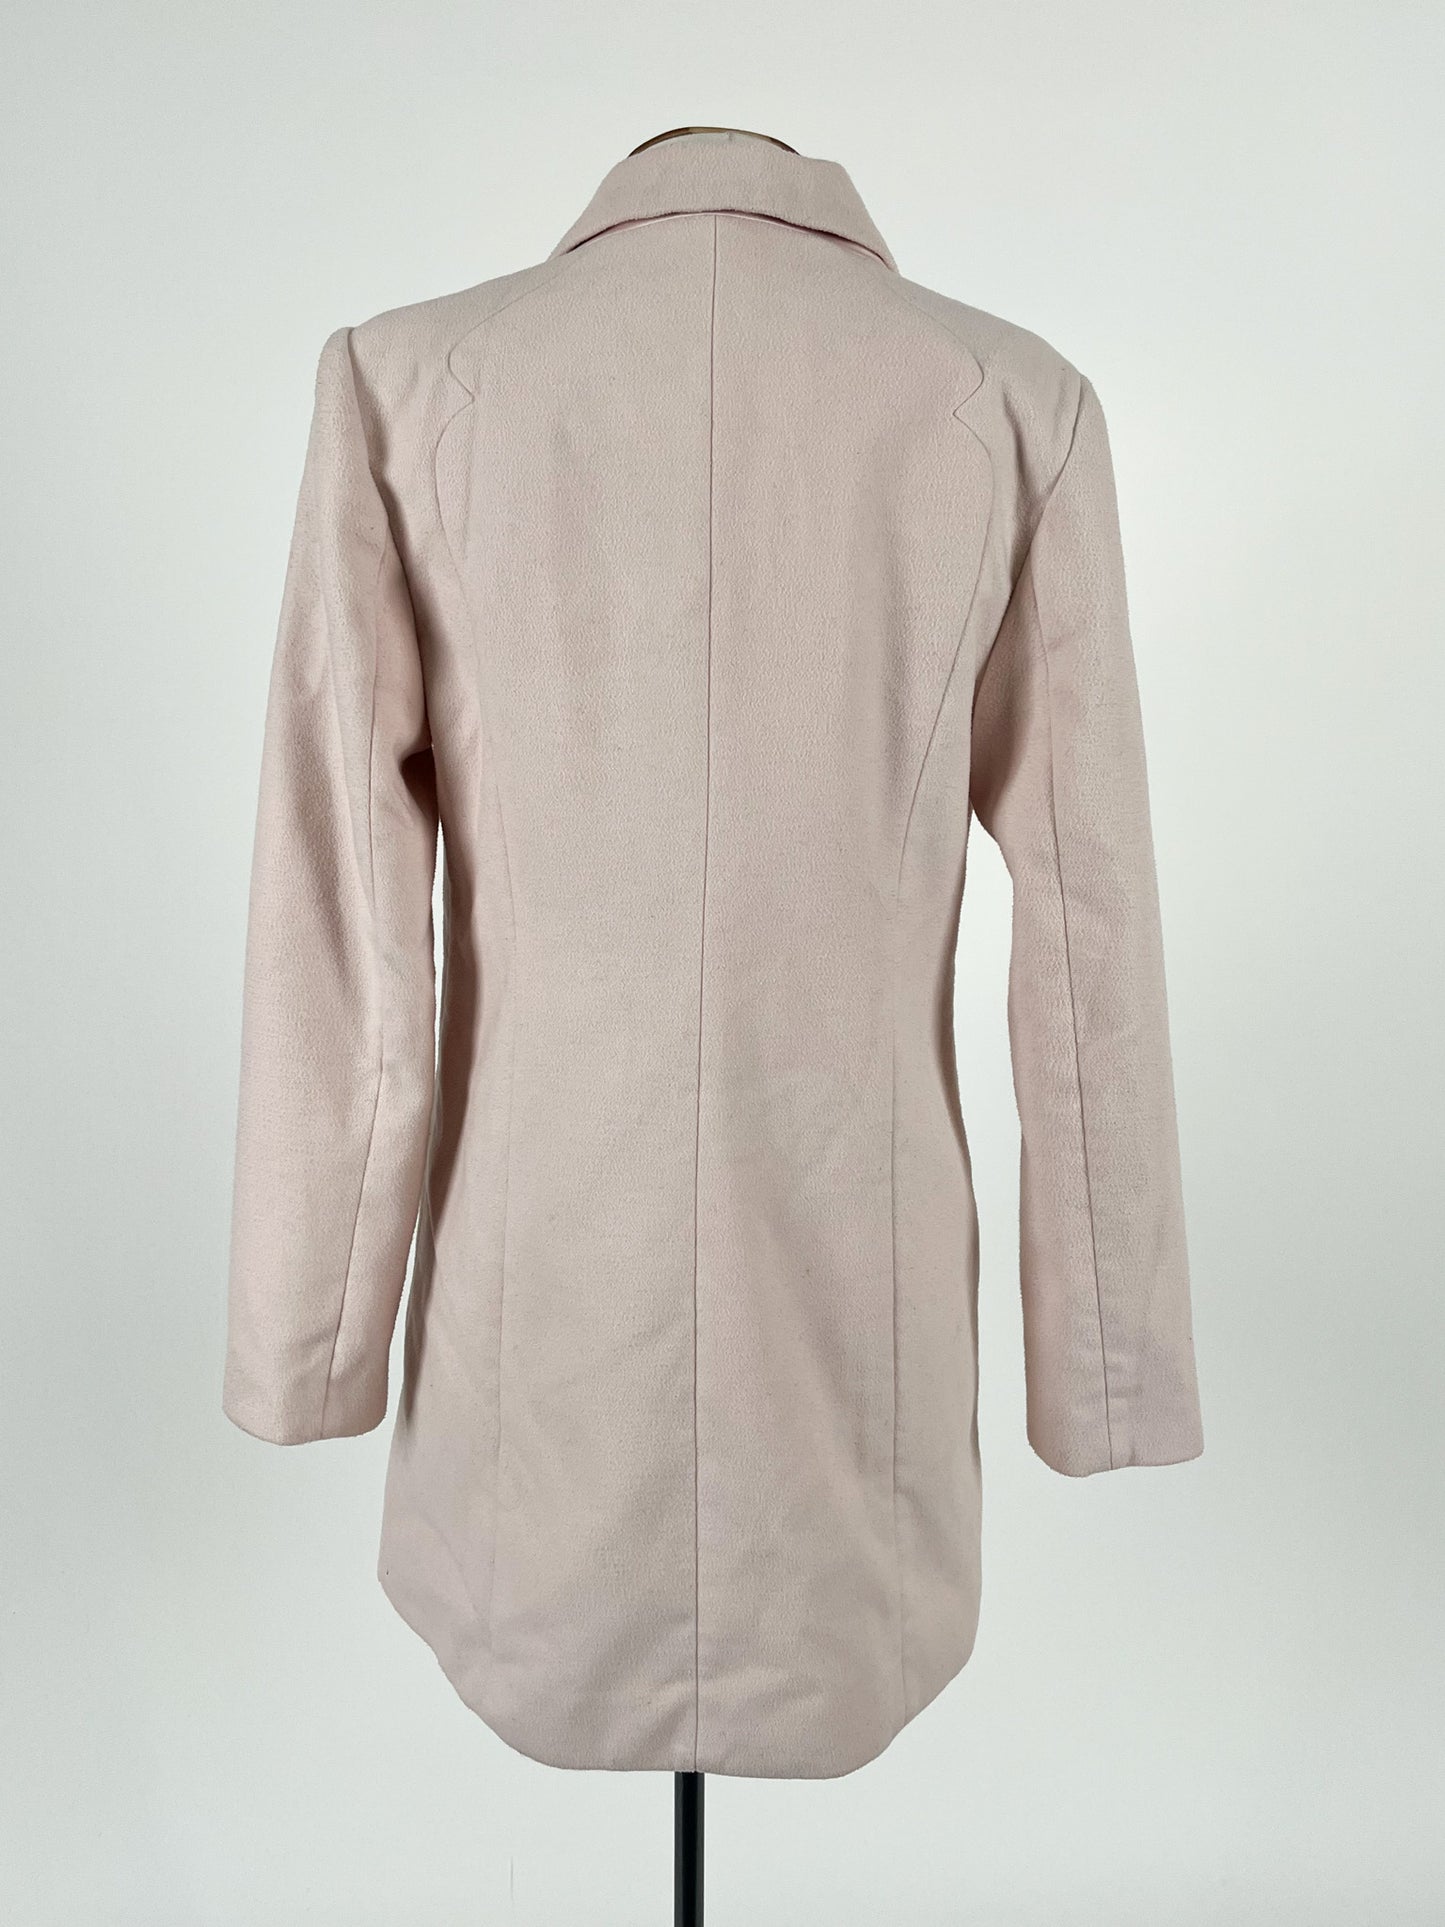 Forever New | Pink Casual/Workwear Coat | Size 8